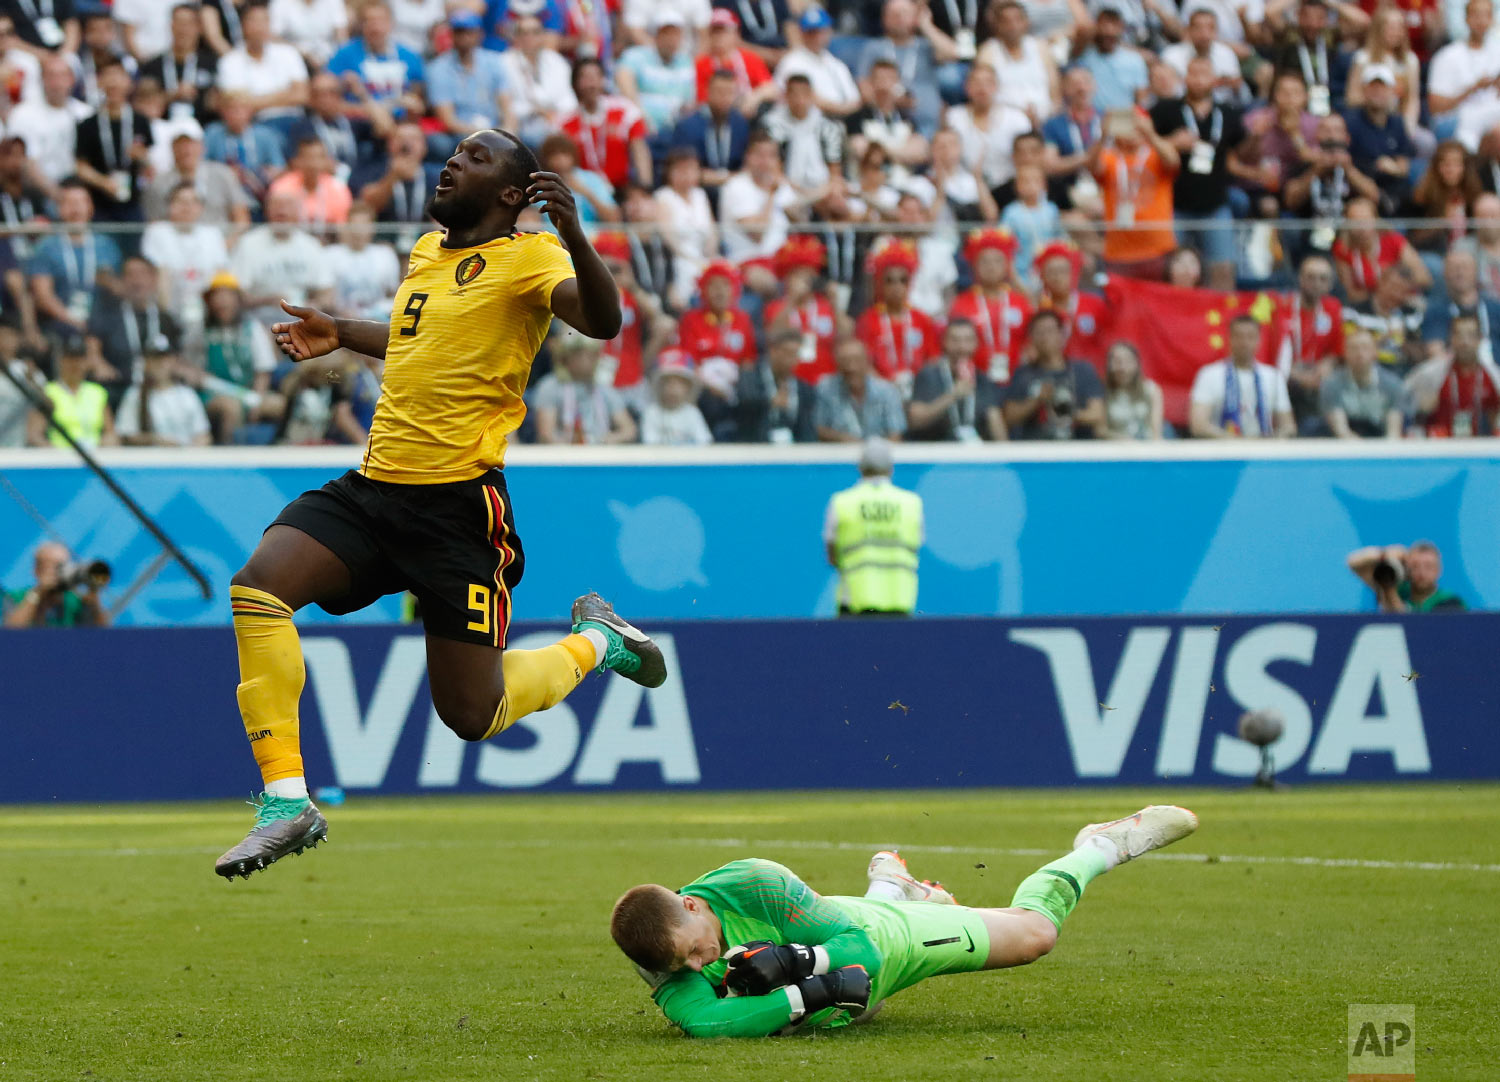  England goalkeeper Jordan Pickford stops a scoring attempt by Belgium's Romelu Lukaku during the third place match between England and Belgium at the 2018 soccer World Cup in the St. Petersburg Stadium in St. Petersburg, Russia, Saturday, July 14, 2